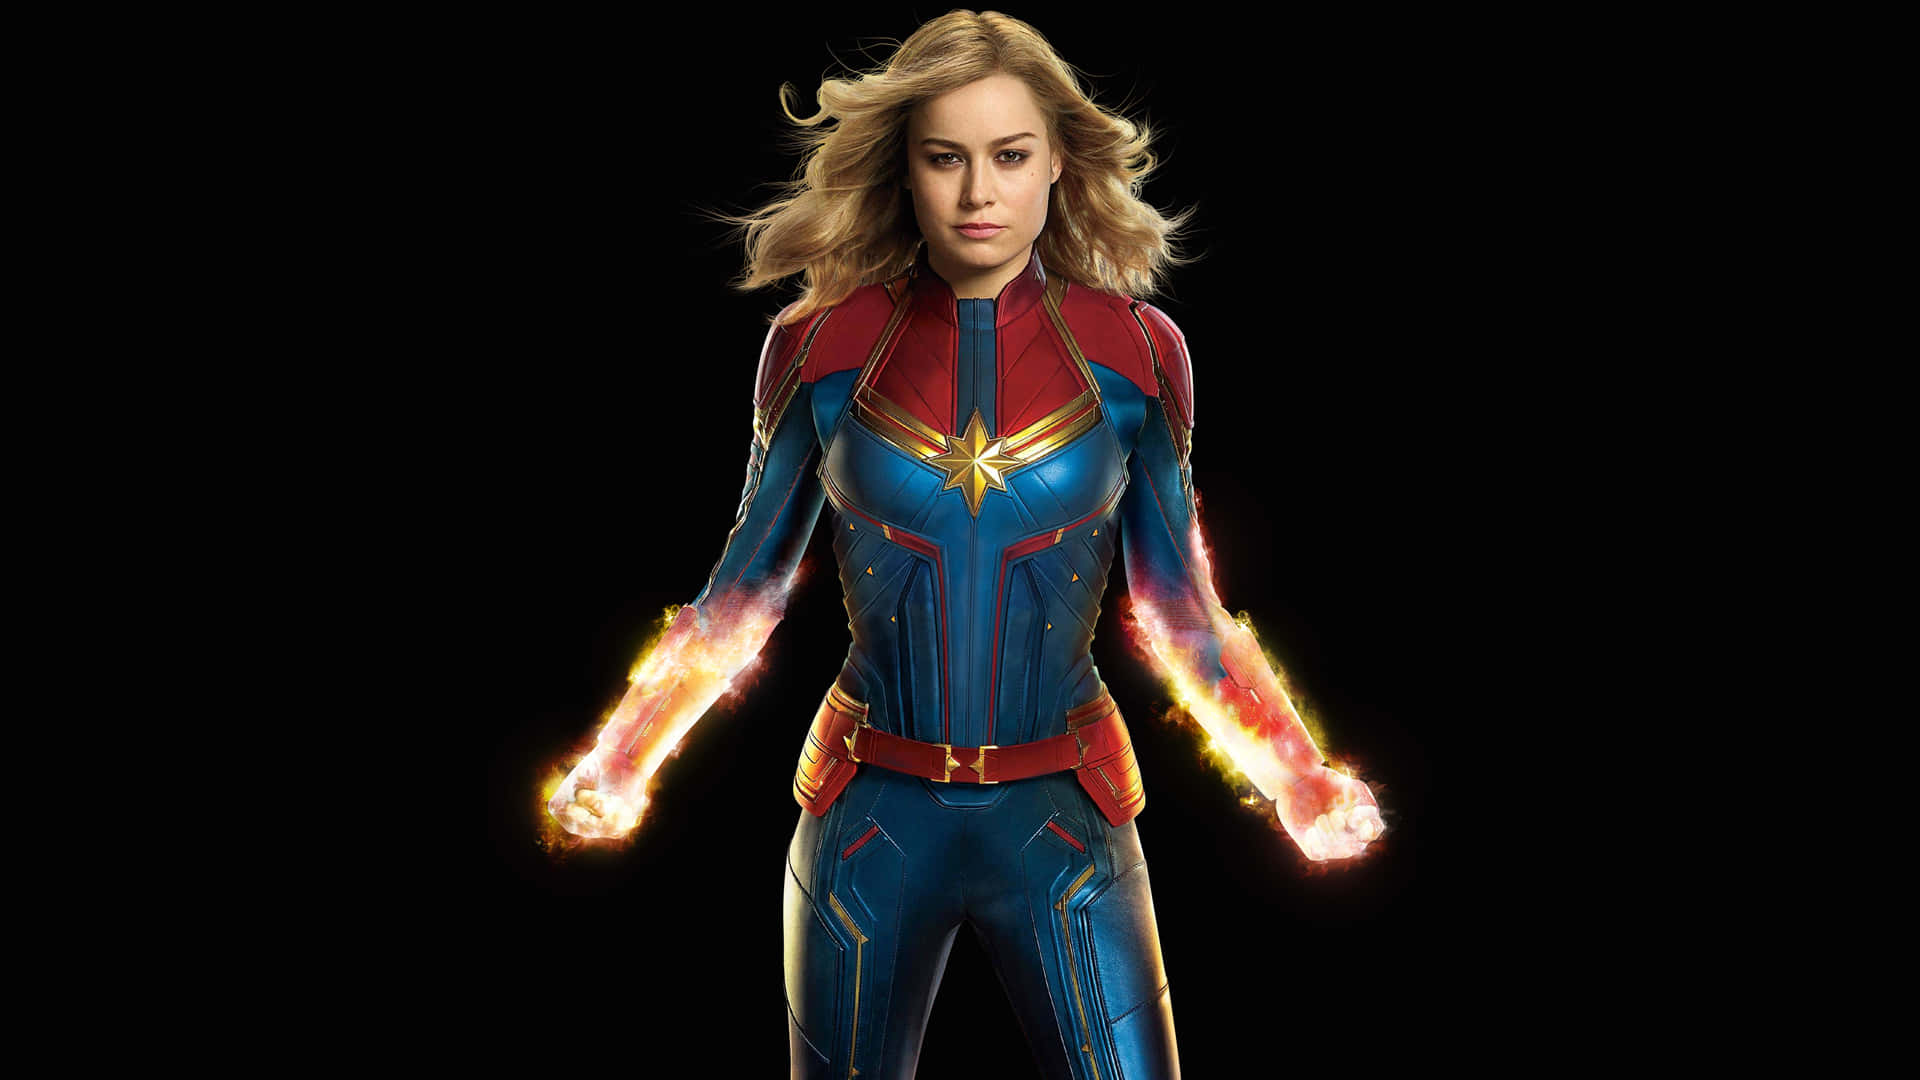 Get ready to explore a universe of cosmic adventures on Captain Marvel's new iPad Wallpaper